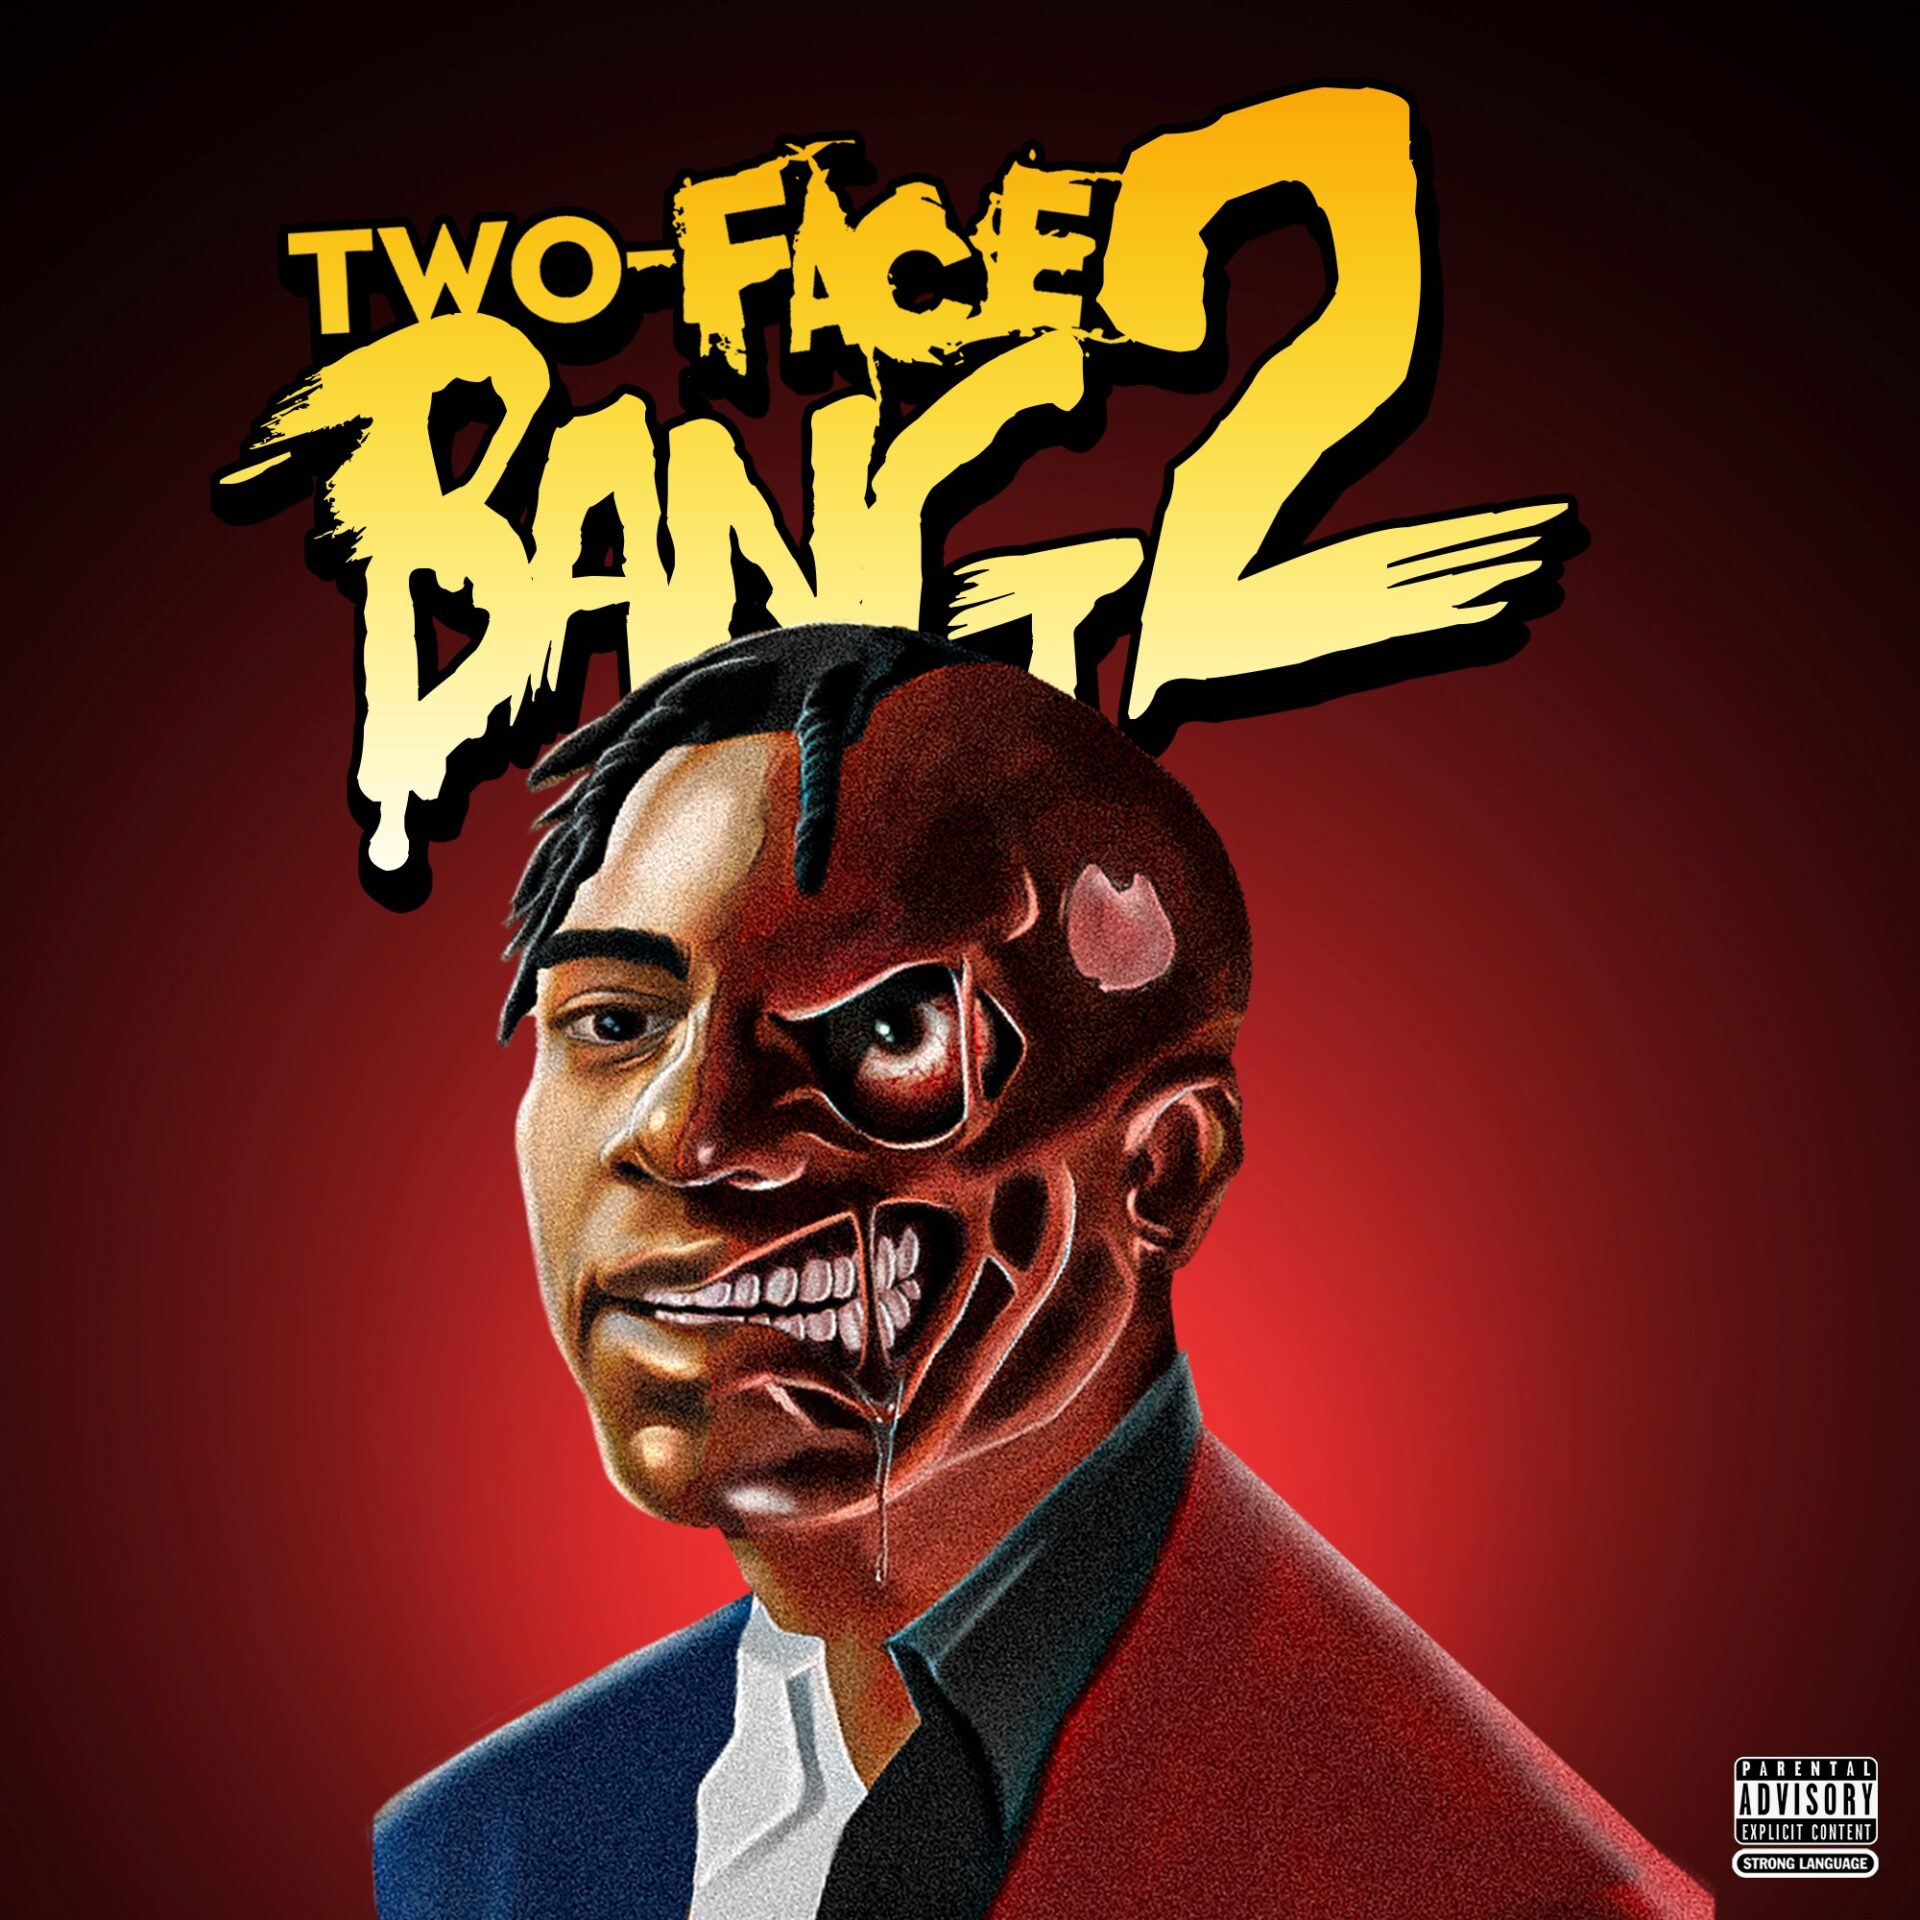 Fredo Bang Releases New Music Video BOP off the album Two Face Bang 2 184054